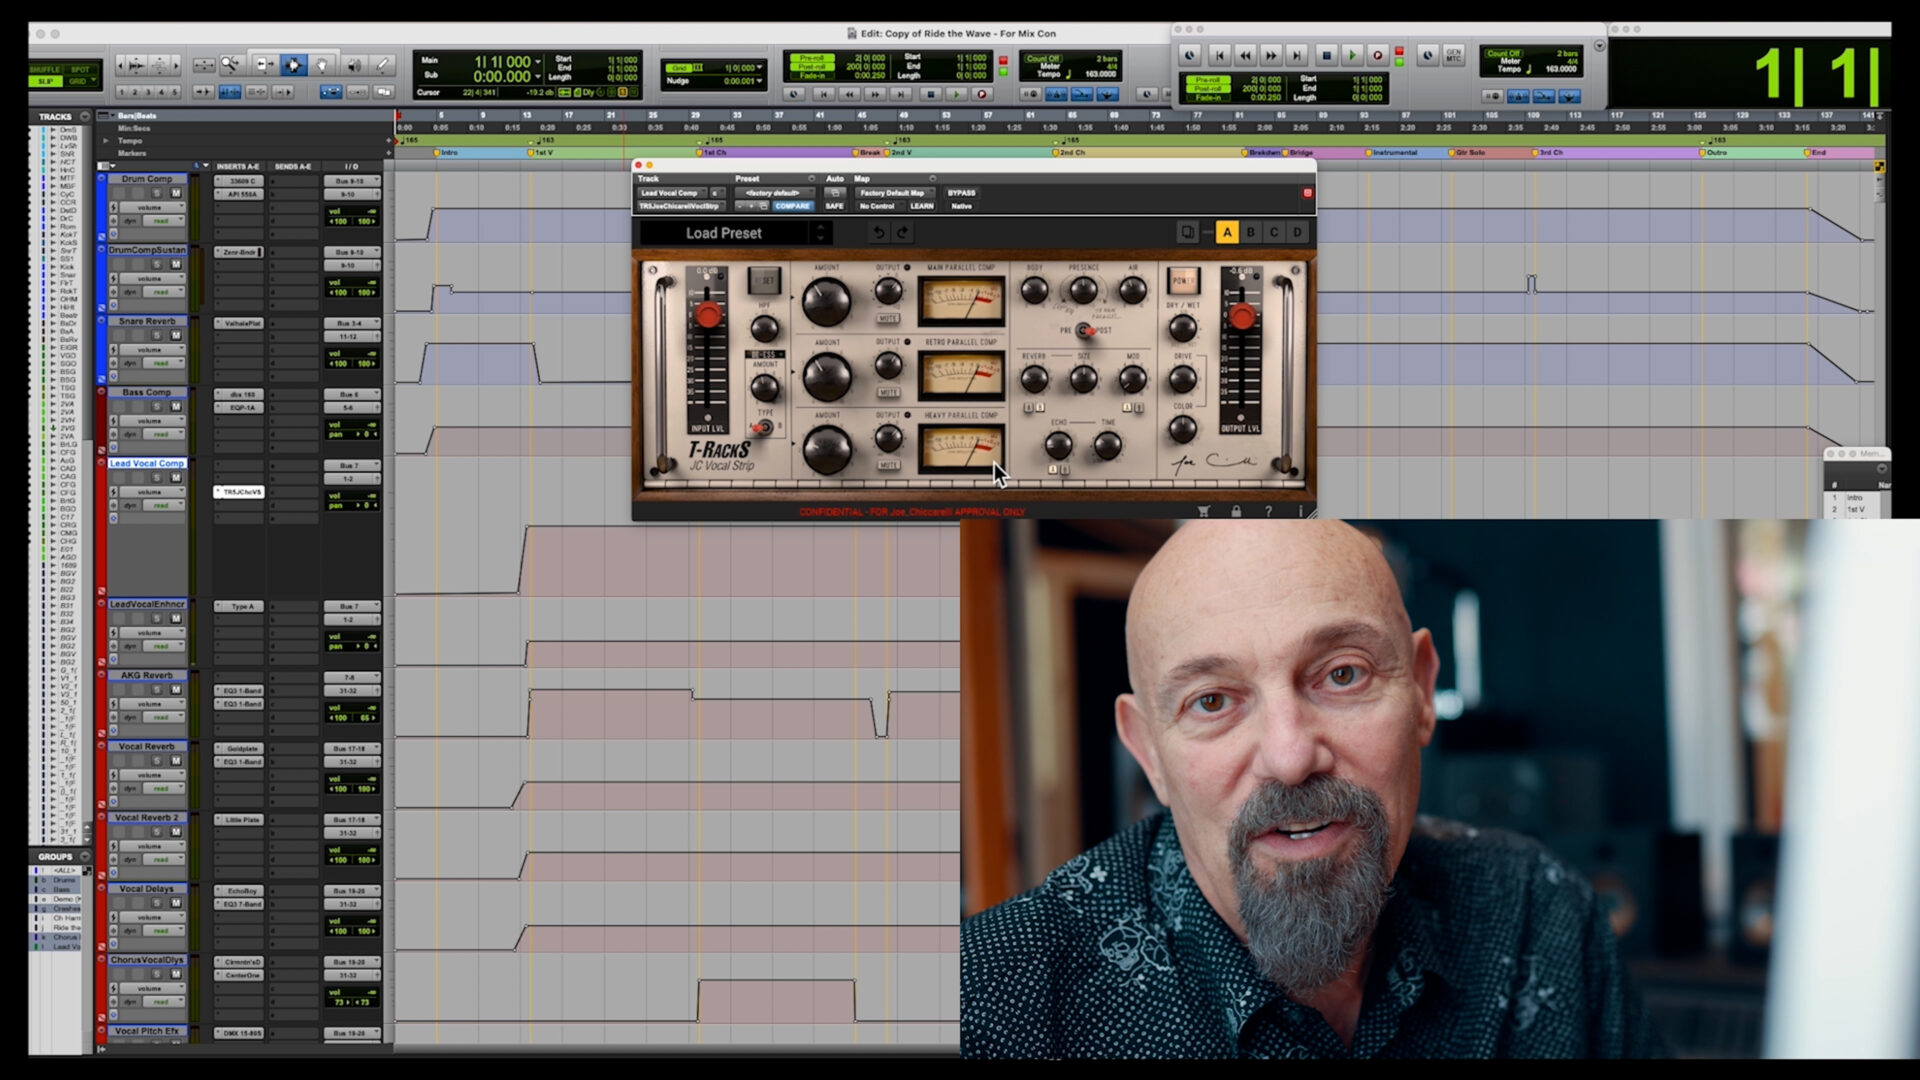 Mixing Masterclass with Joe Chiccarelli [Beck, U2, The White Stripes, The Killers, Morrissey]